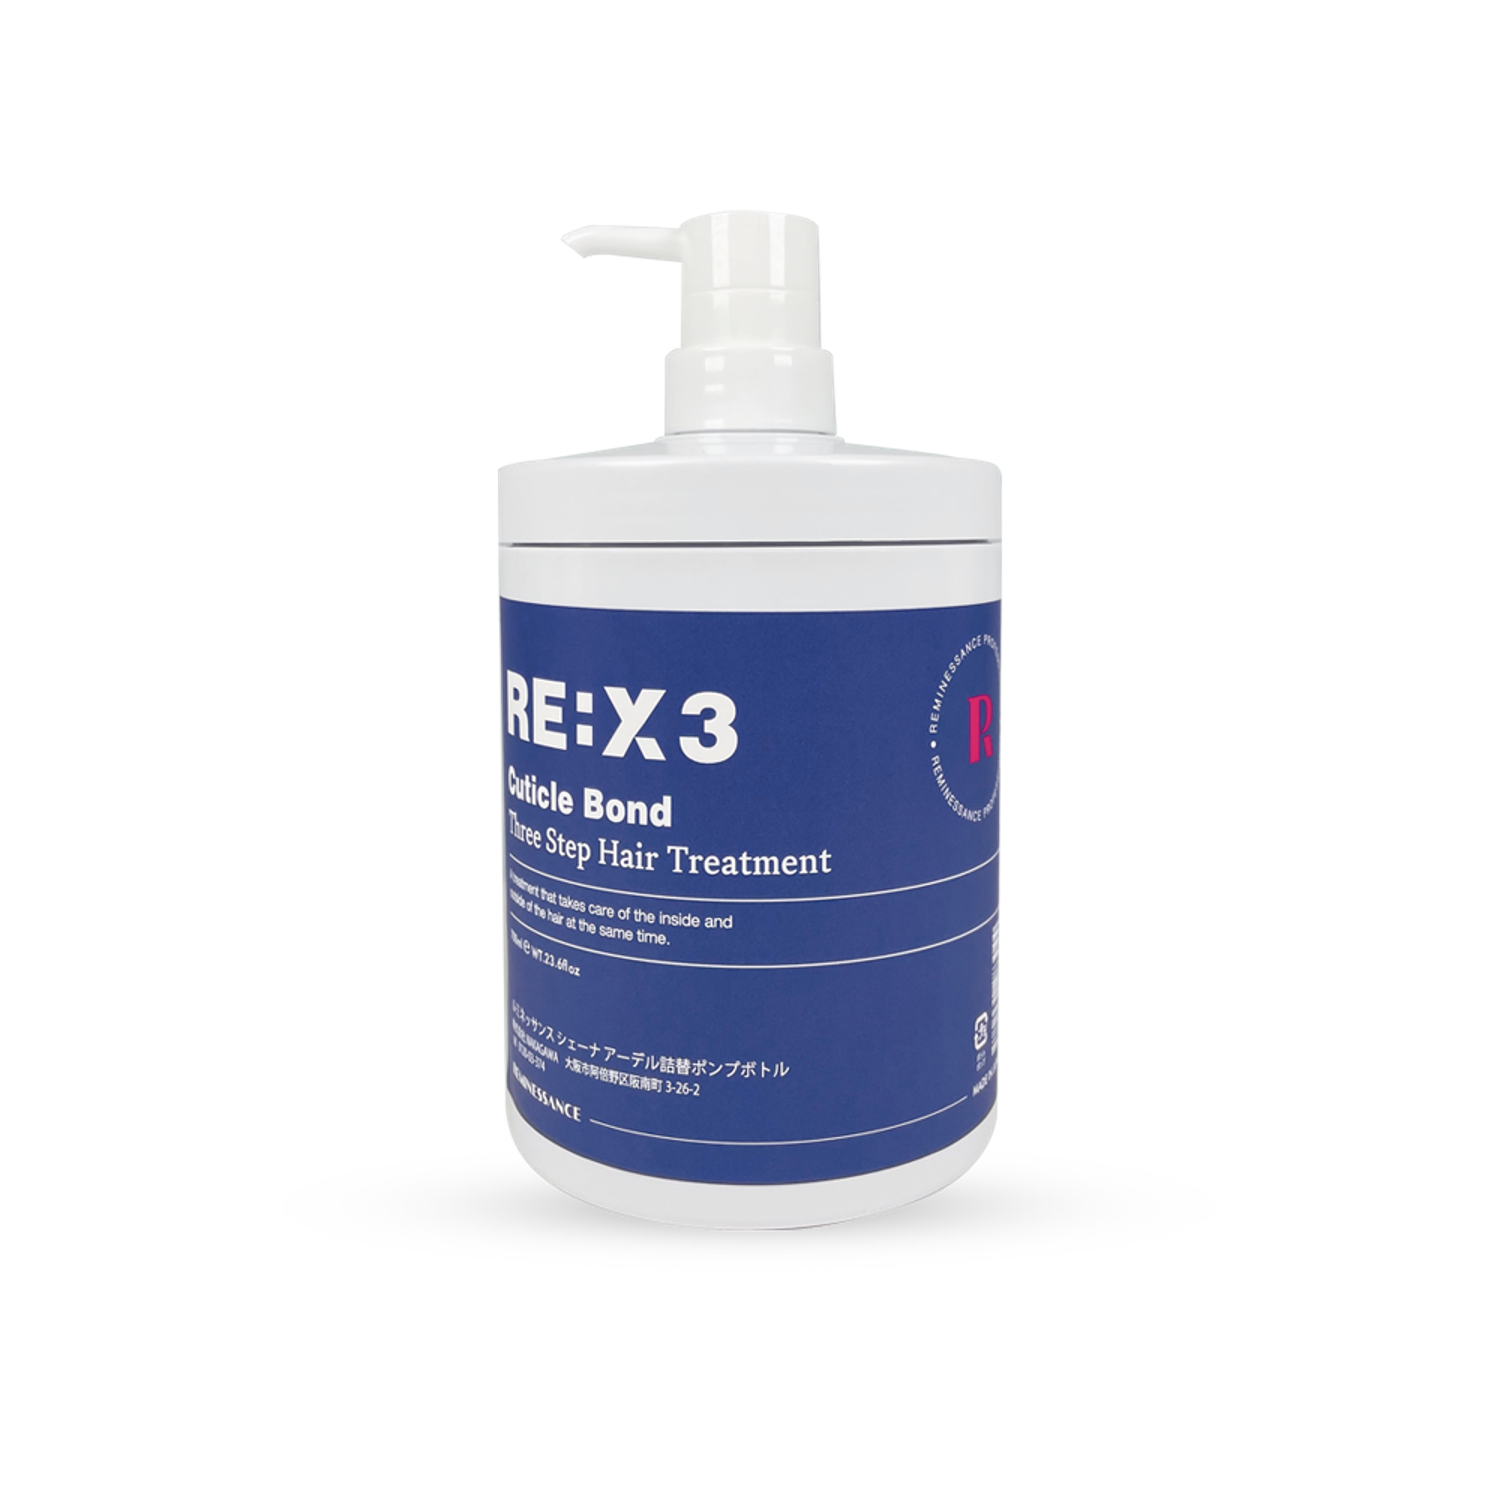 RE:X3 Treatment and Refill Container